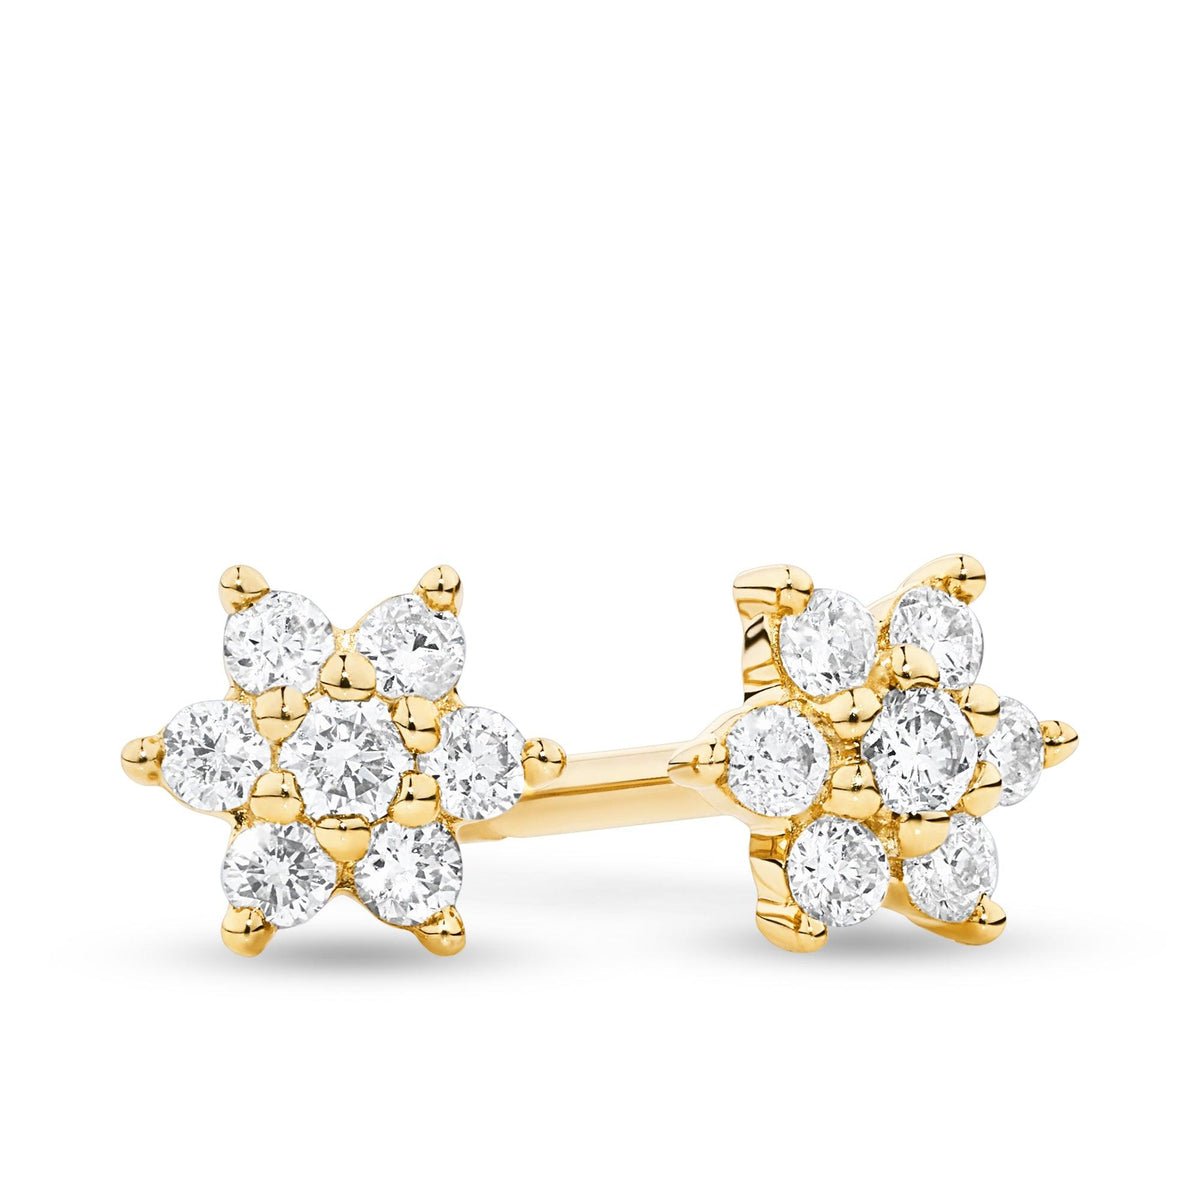 0.124ct TW Diamond Petite Flower Earrings in 9ct Yellow Gold - Wallace Bishop